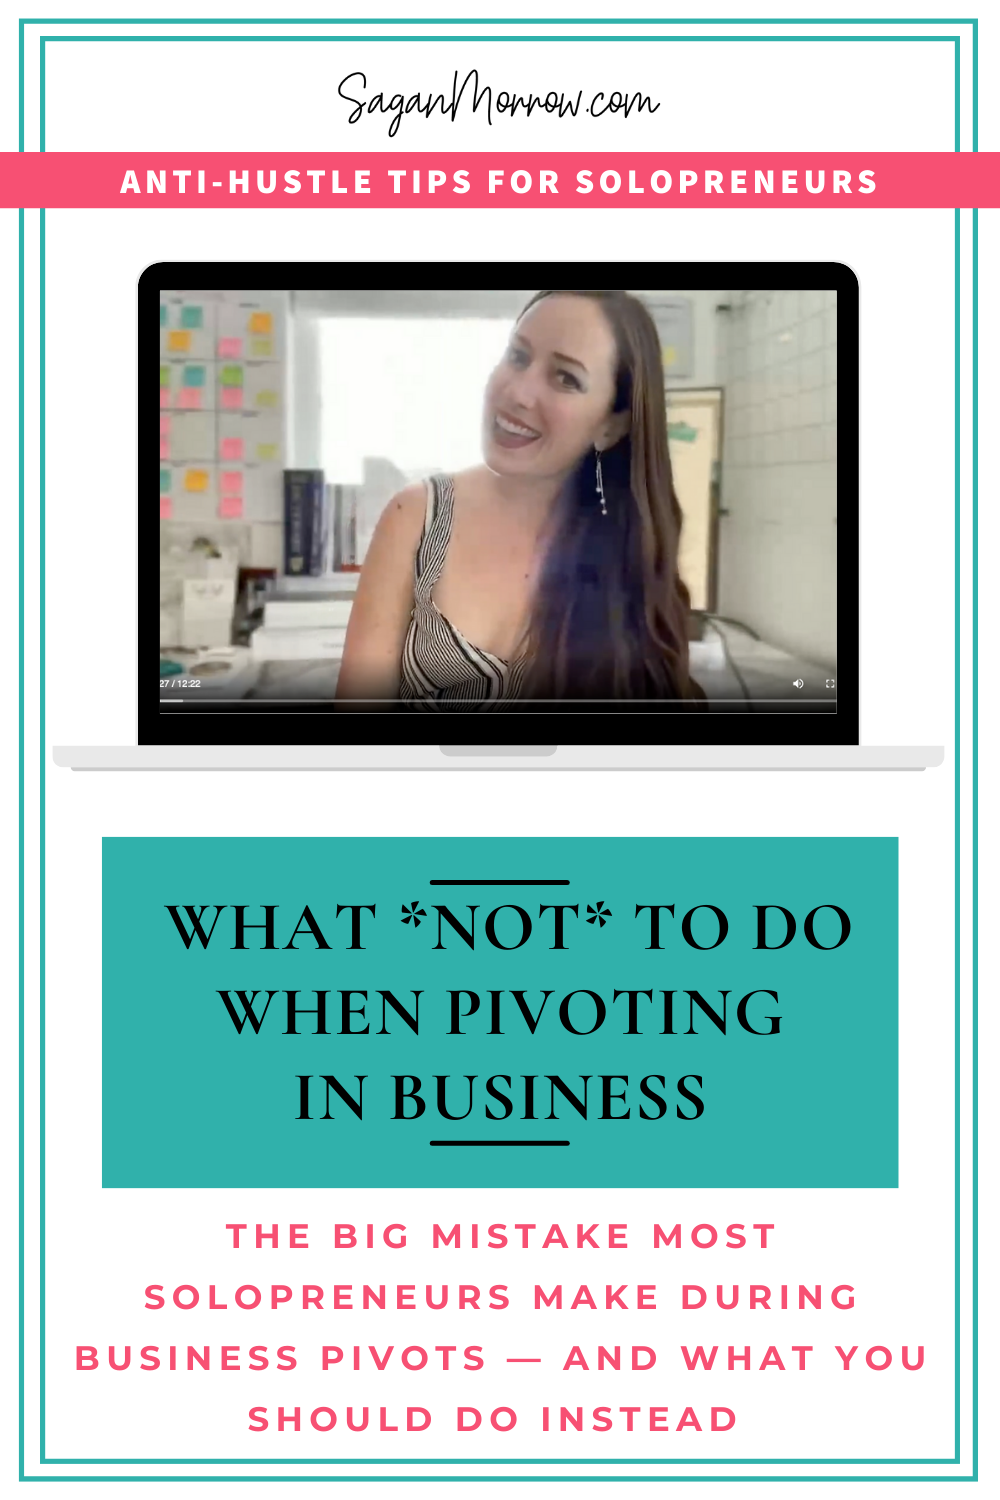 What NOT to do when pivoting your solopreneur business